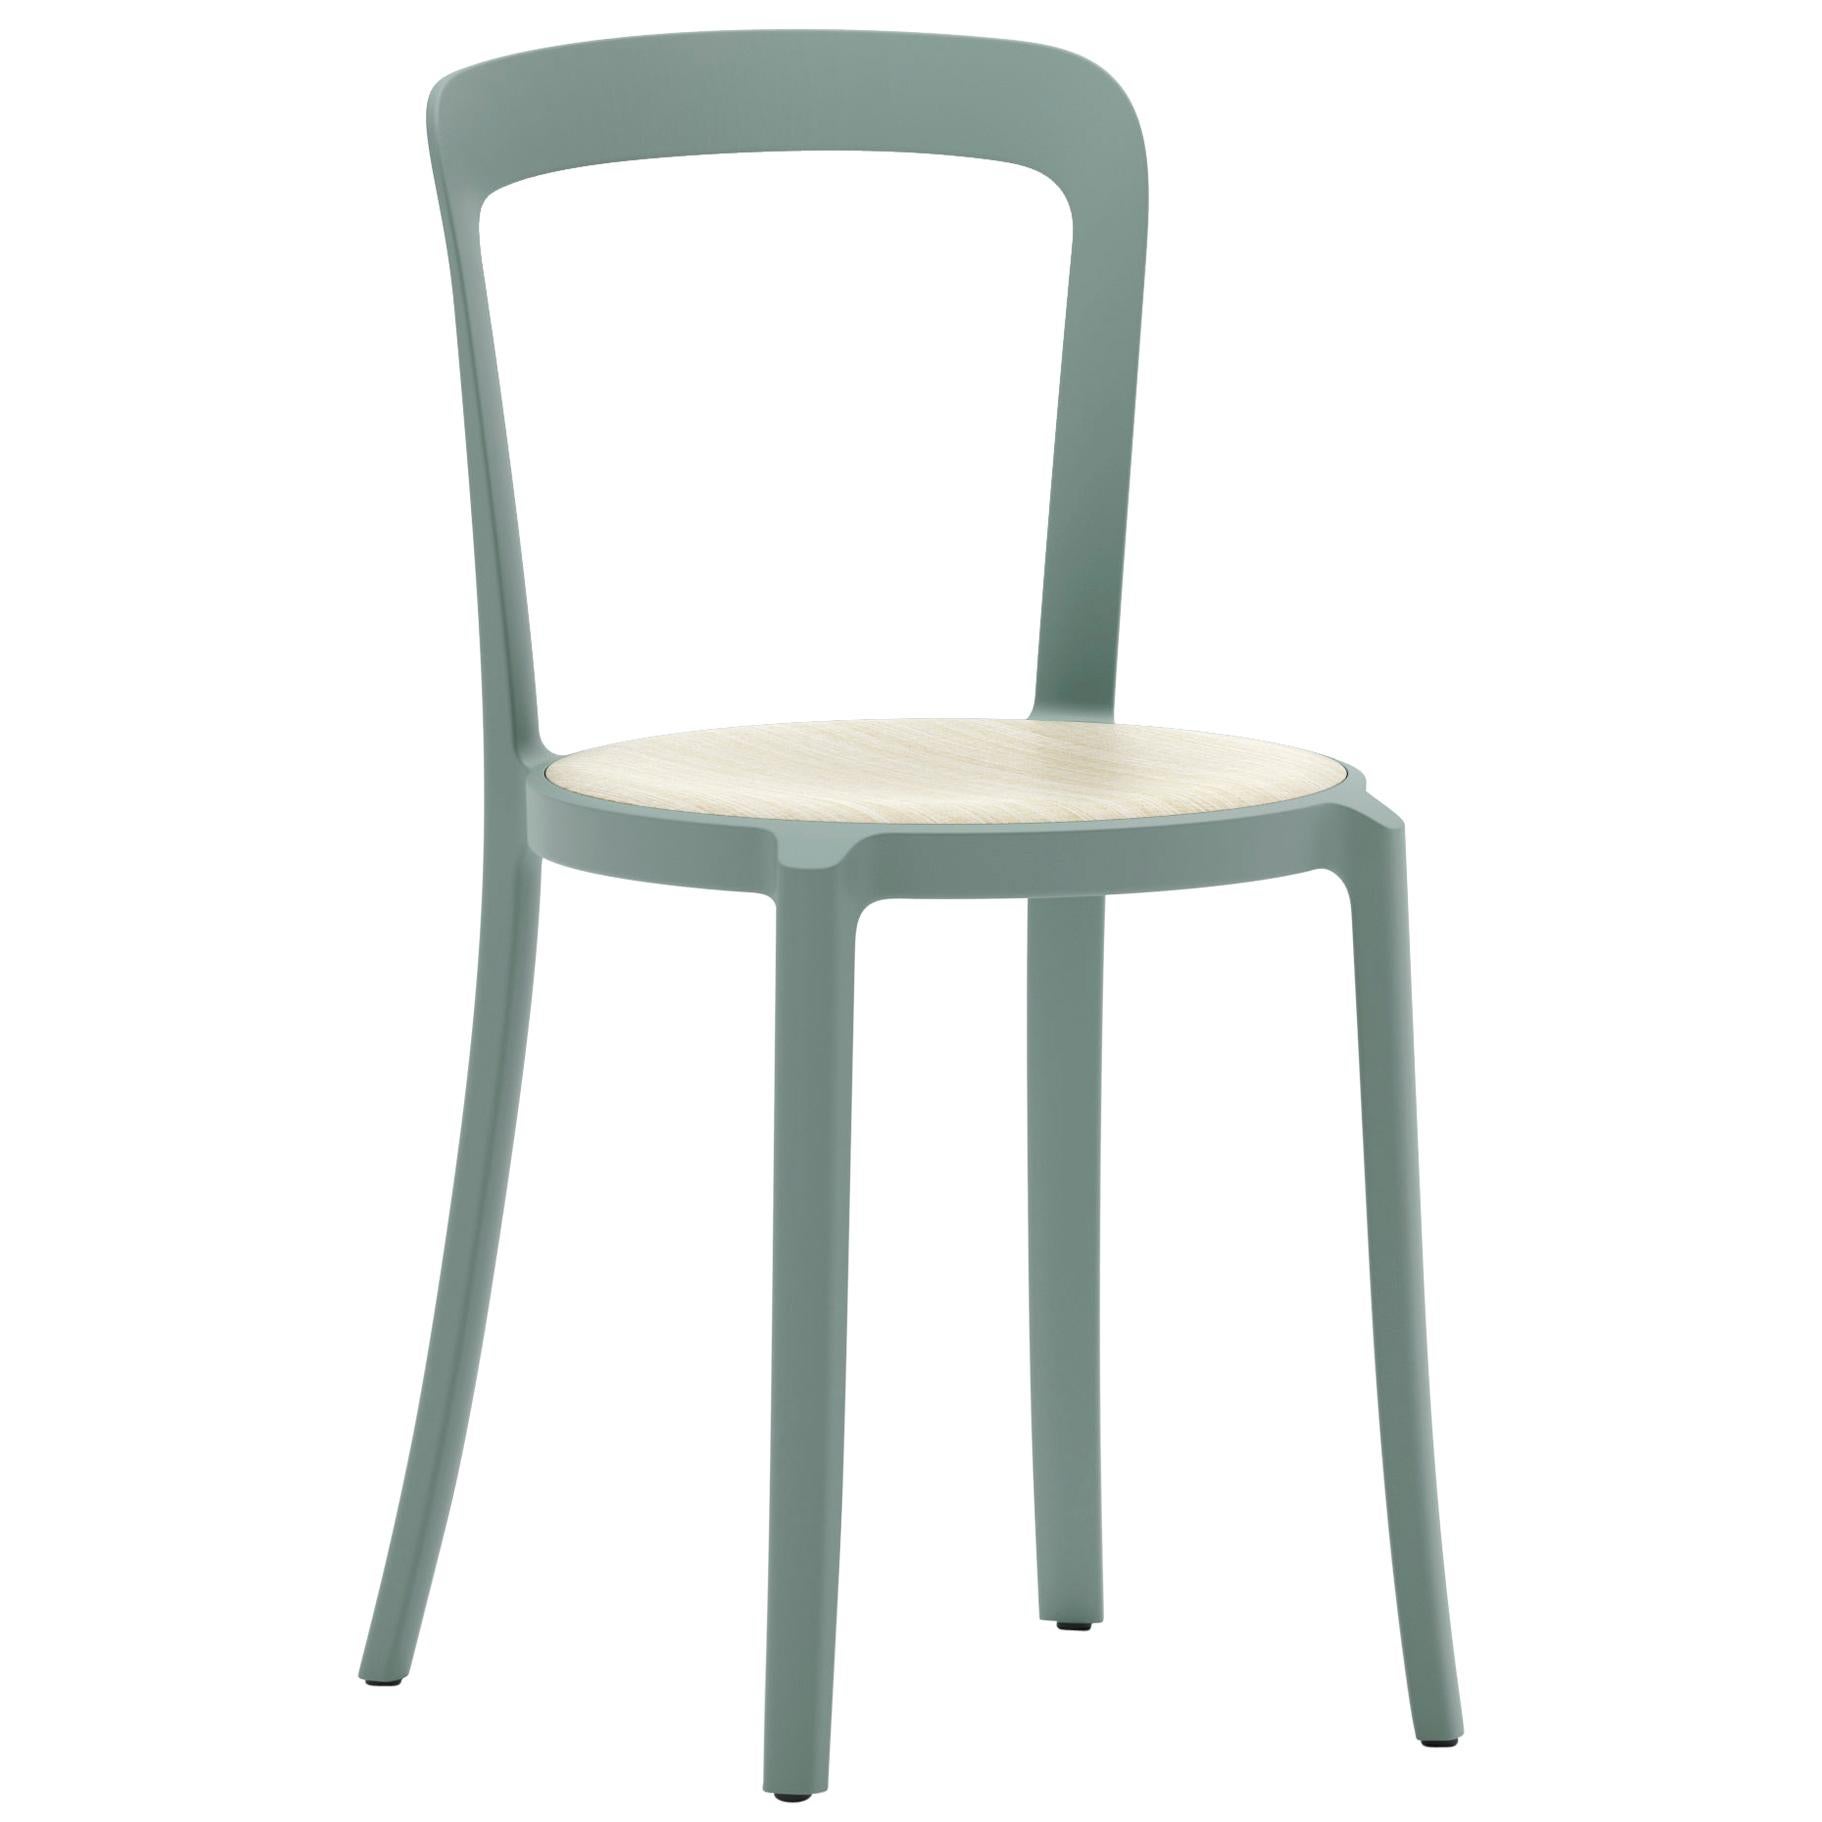 Emeco On & On Stacking Chair in Light Blue with Ash seat by Barber & Osgerby For Sale